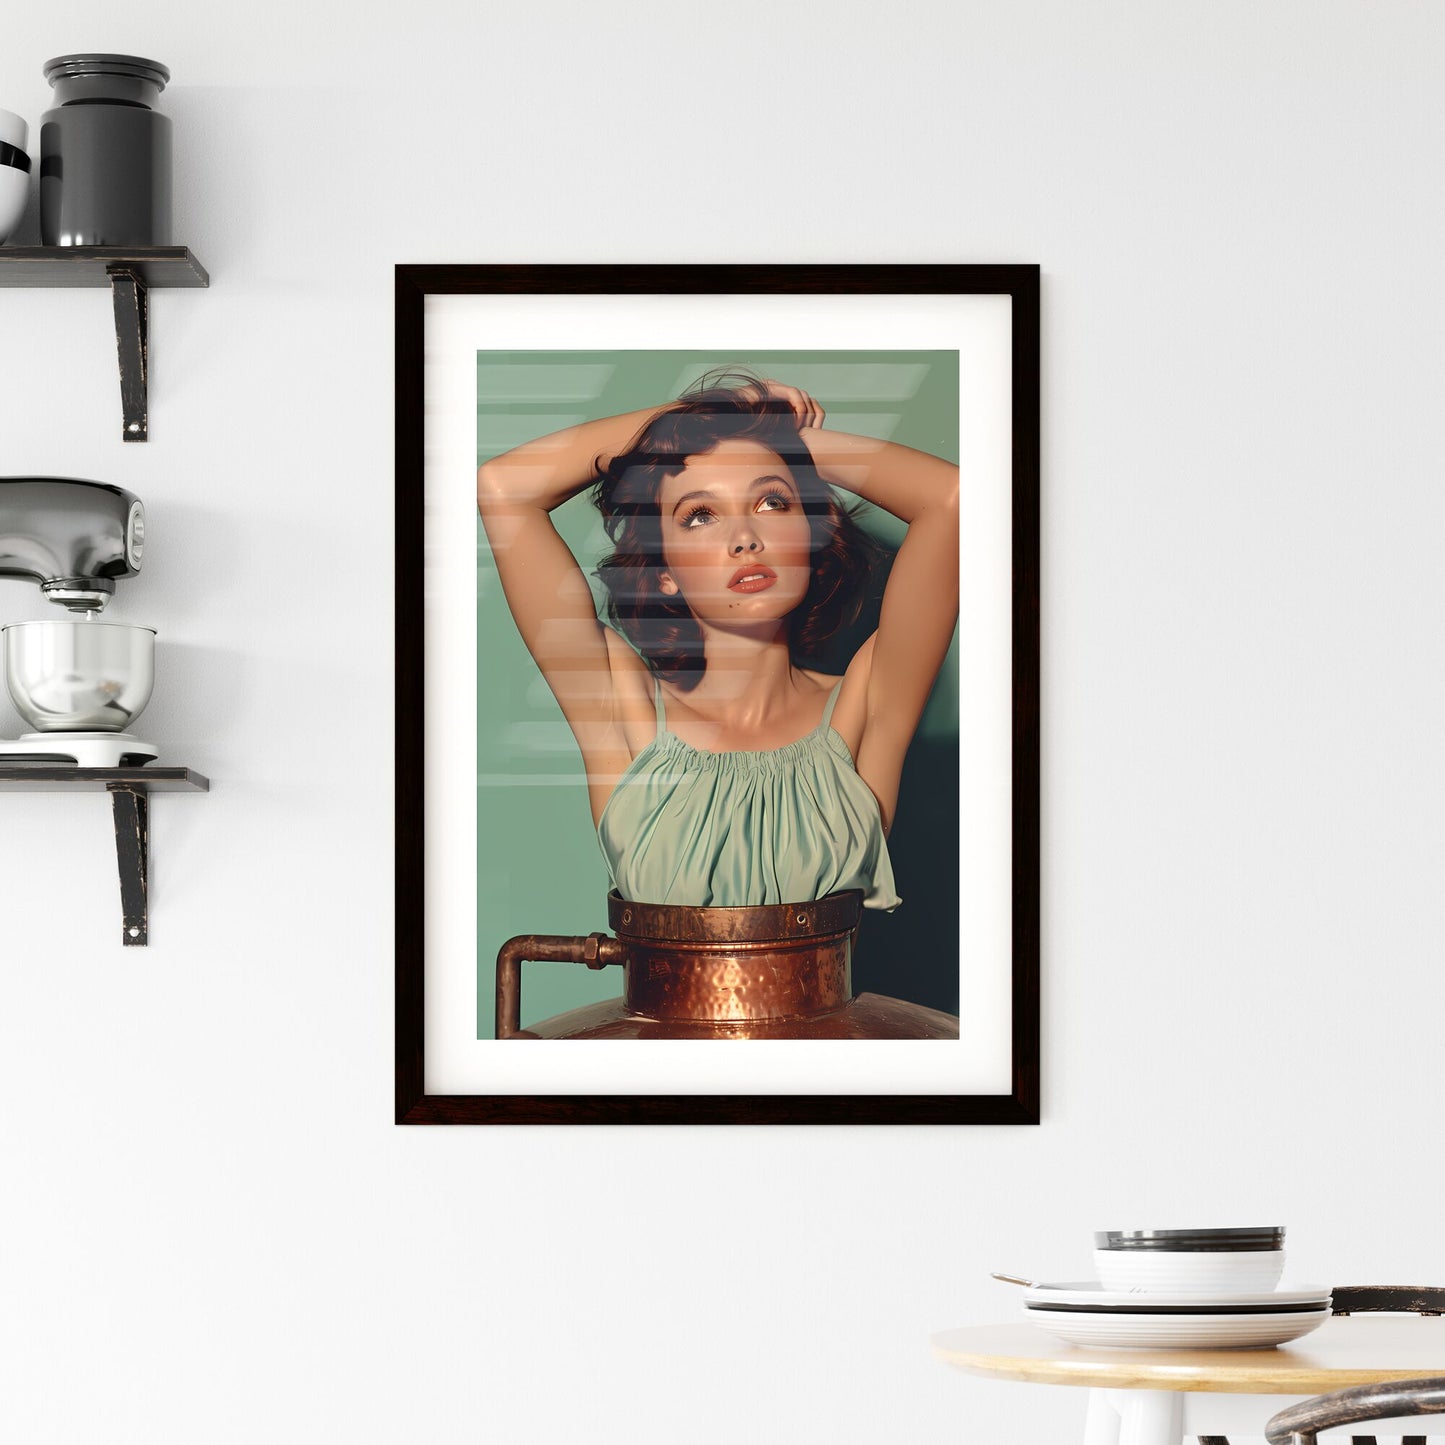 50s pin up girl sitting on top of a copper still wearing a short halter top and denim shorts - Art print of a woman with her arms behind her head Default Title